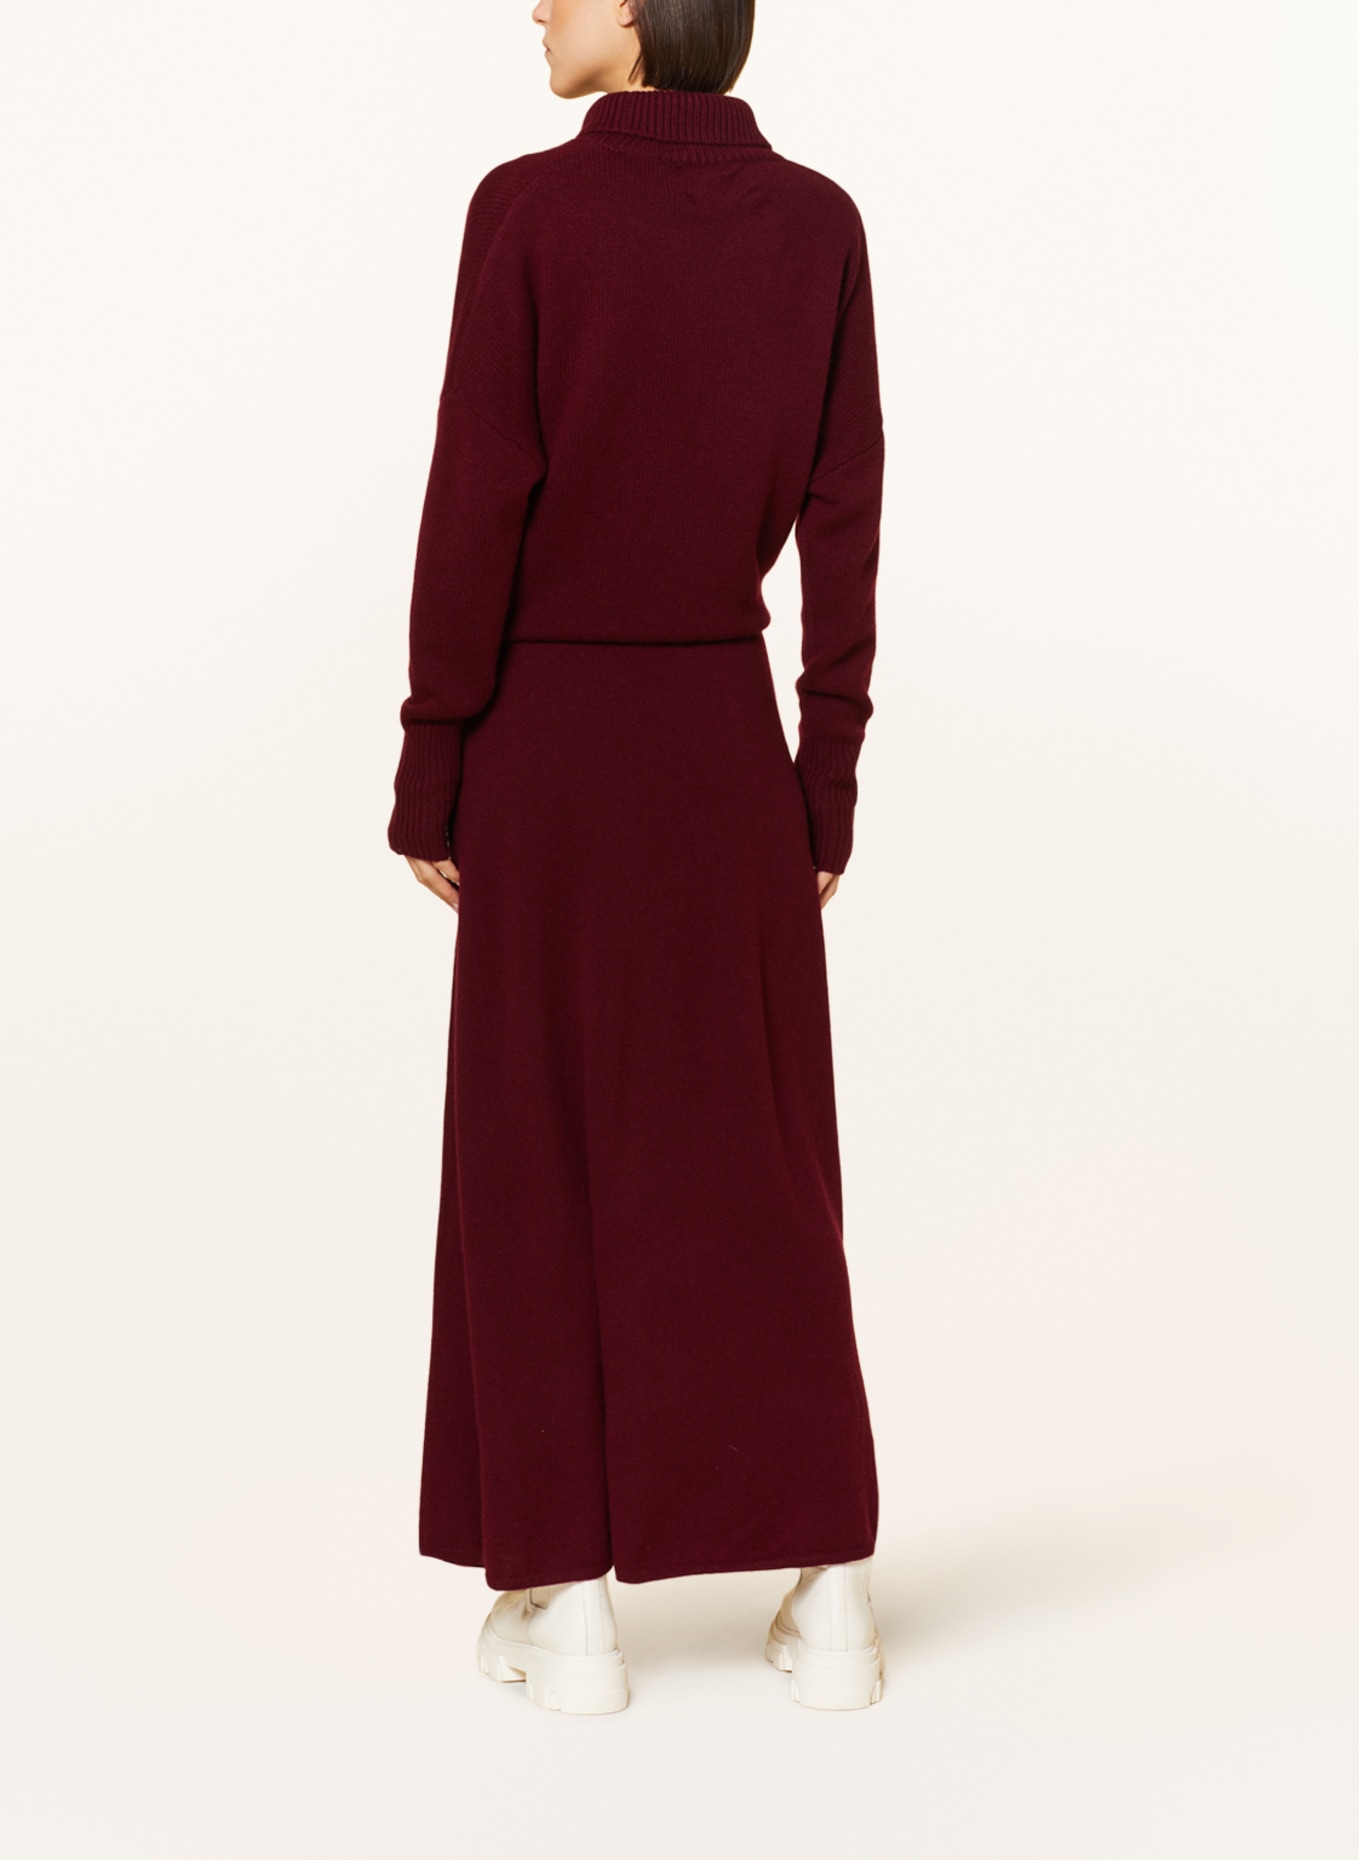 LISA YANG Knit skirt DOLLY made of cashmere, Color: DARK RED (Image 3)